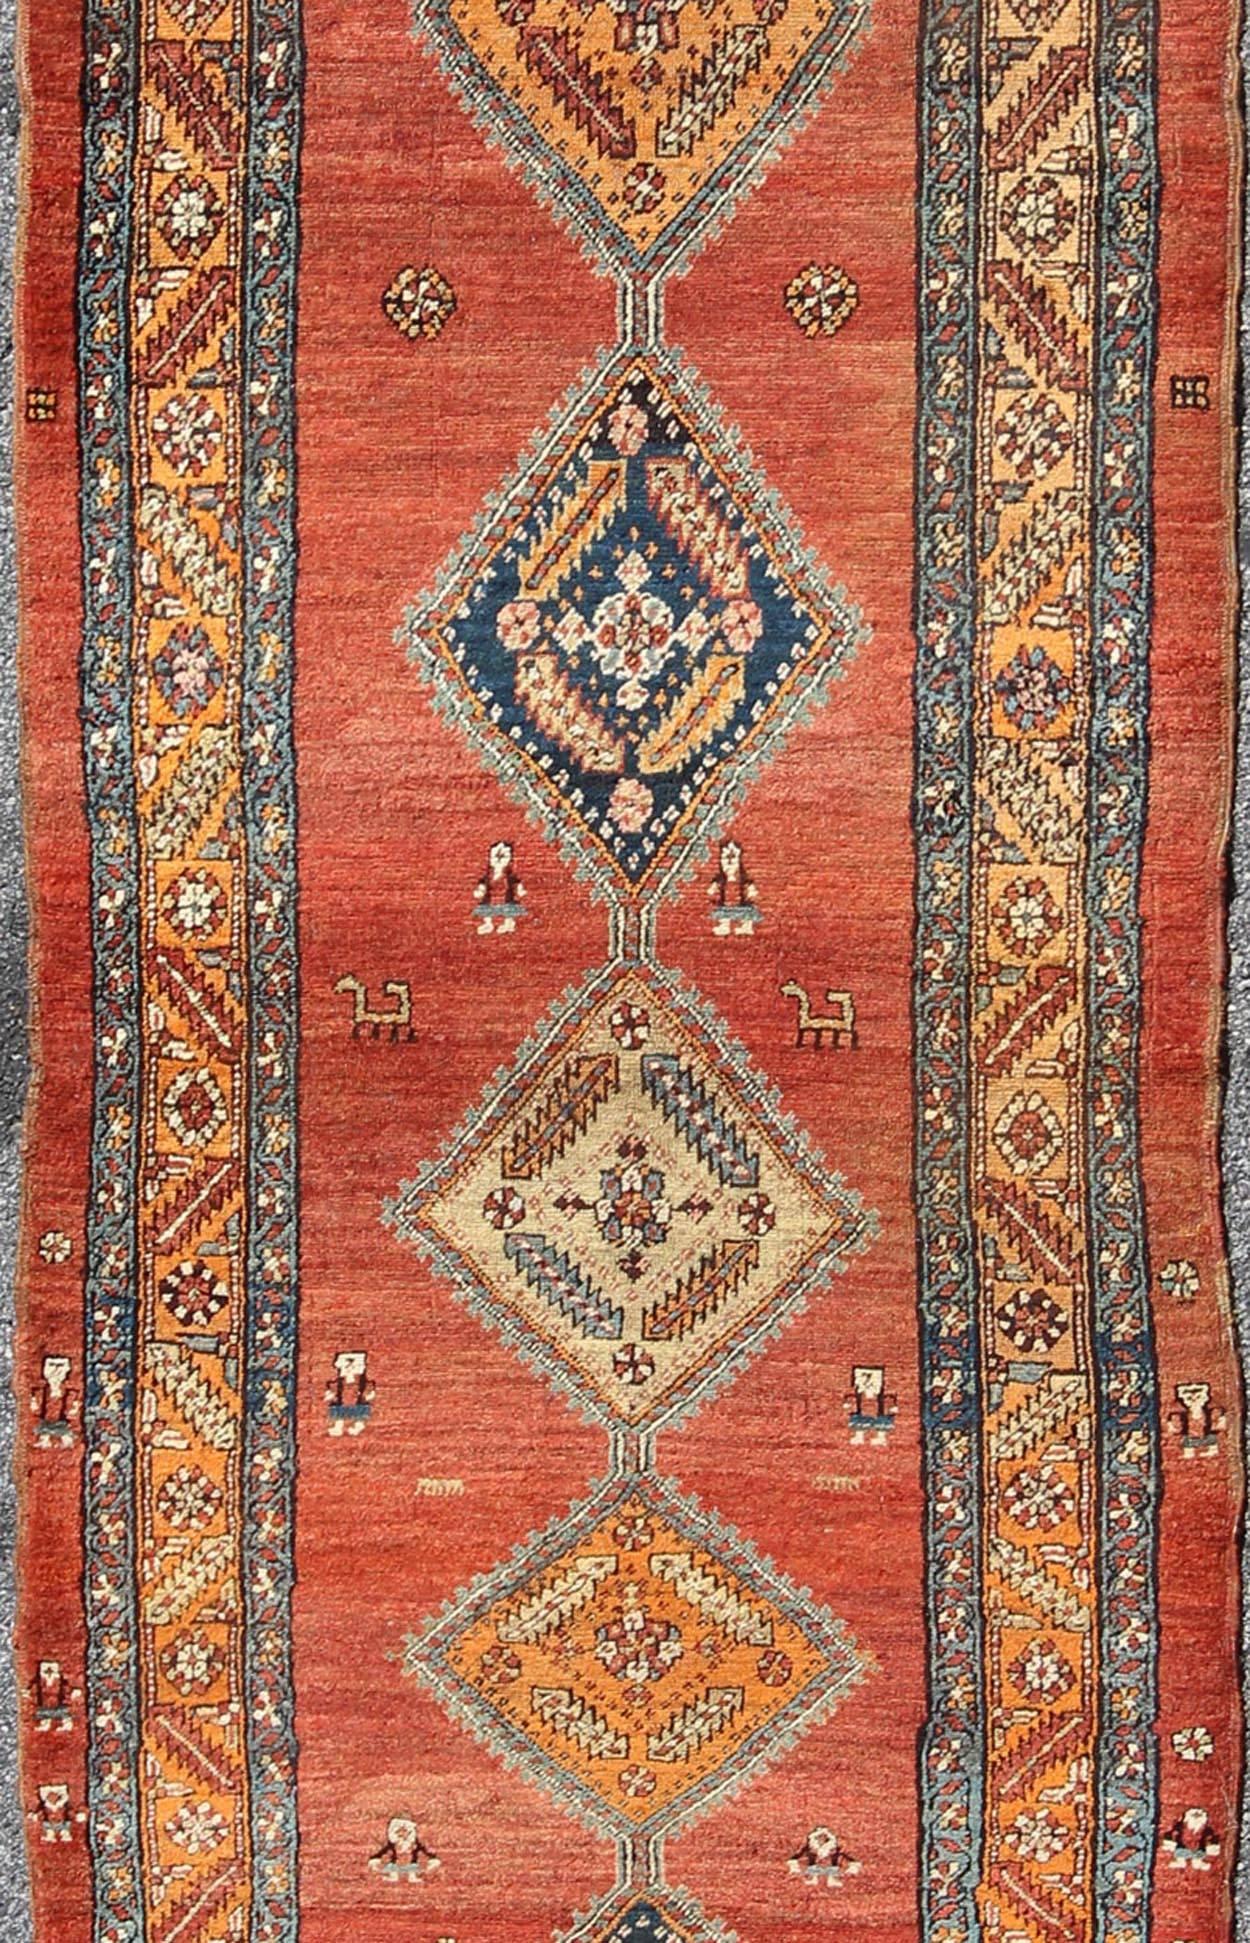 Late 19th Century Antique Persian Bakshaish Rug with Tribal Medallions in Red In Excellent Condition For Sale In Atlanta, GA